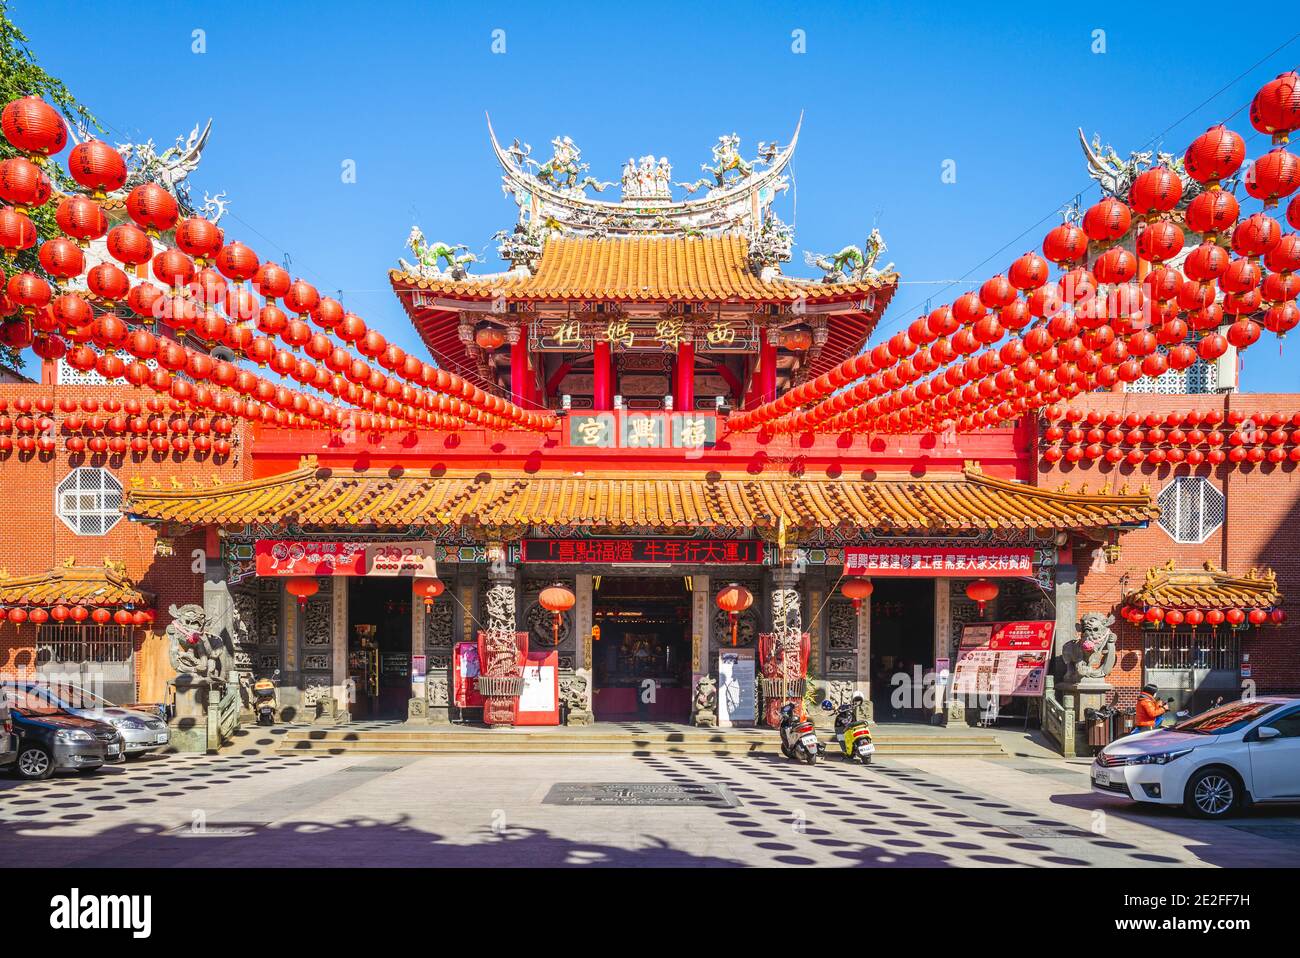 January 13, 2021: Fuxing Temple, a temple at xiluo, yunlin, taiwan, was built in 1723 to enshrine the statue of Mazu brought from China in 1717. This Stock Photo